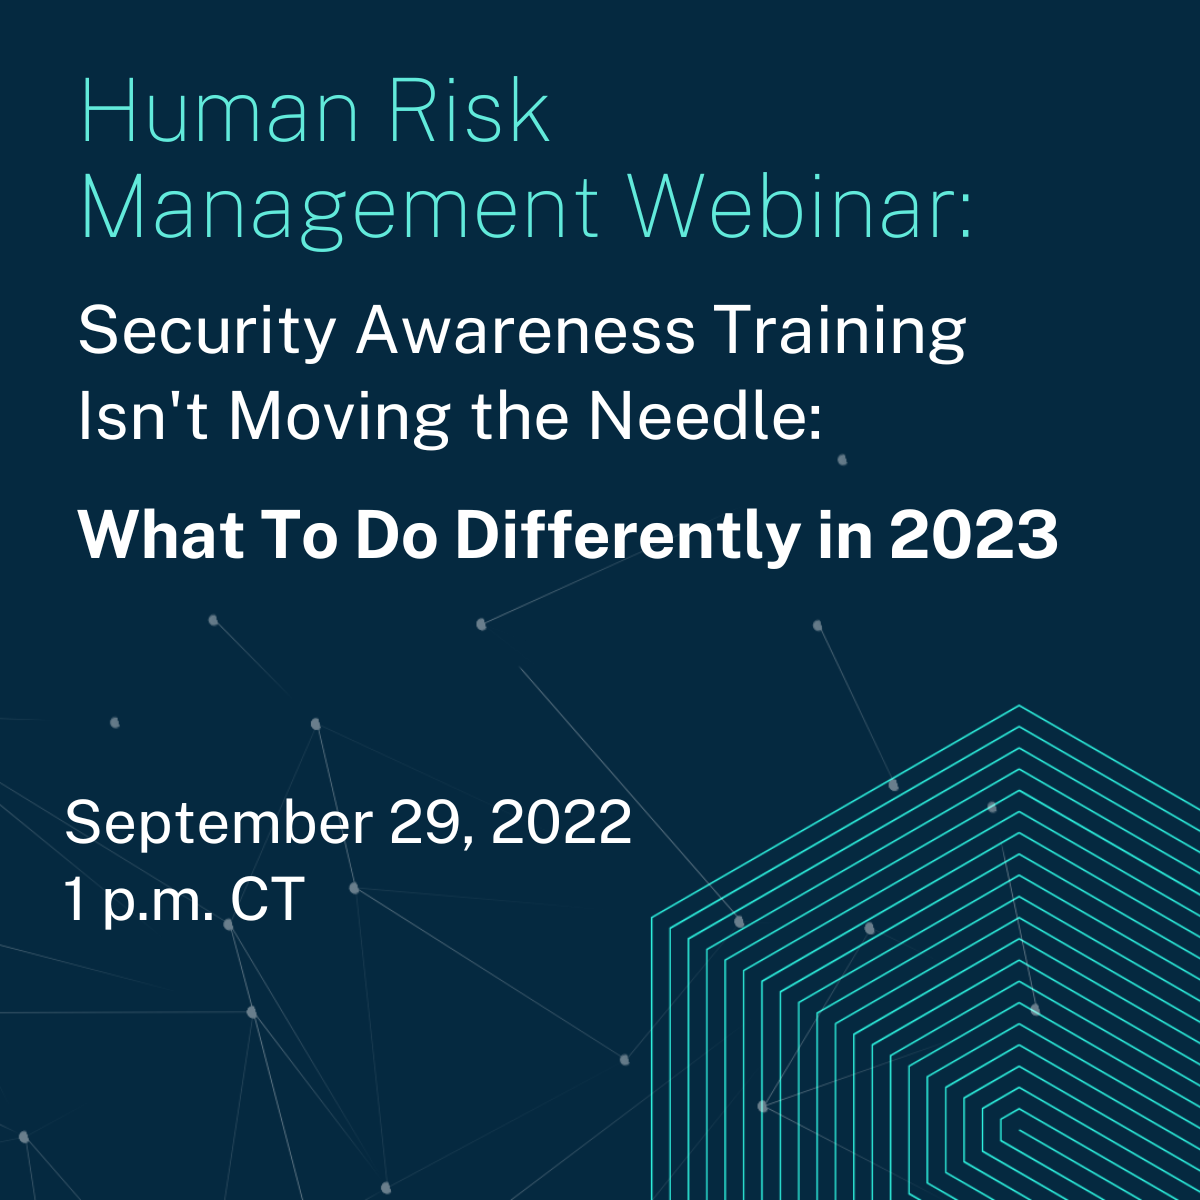 HRM Webinar - What To Do Differently in 2023